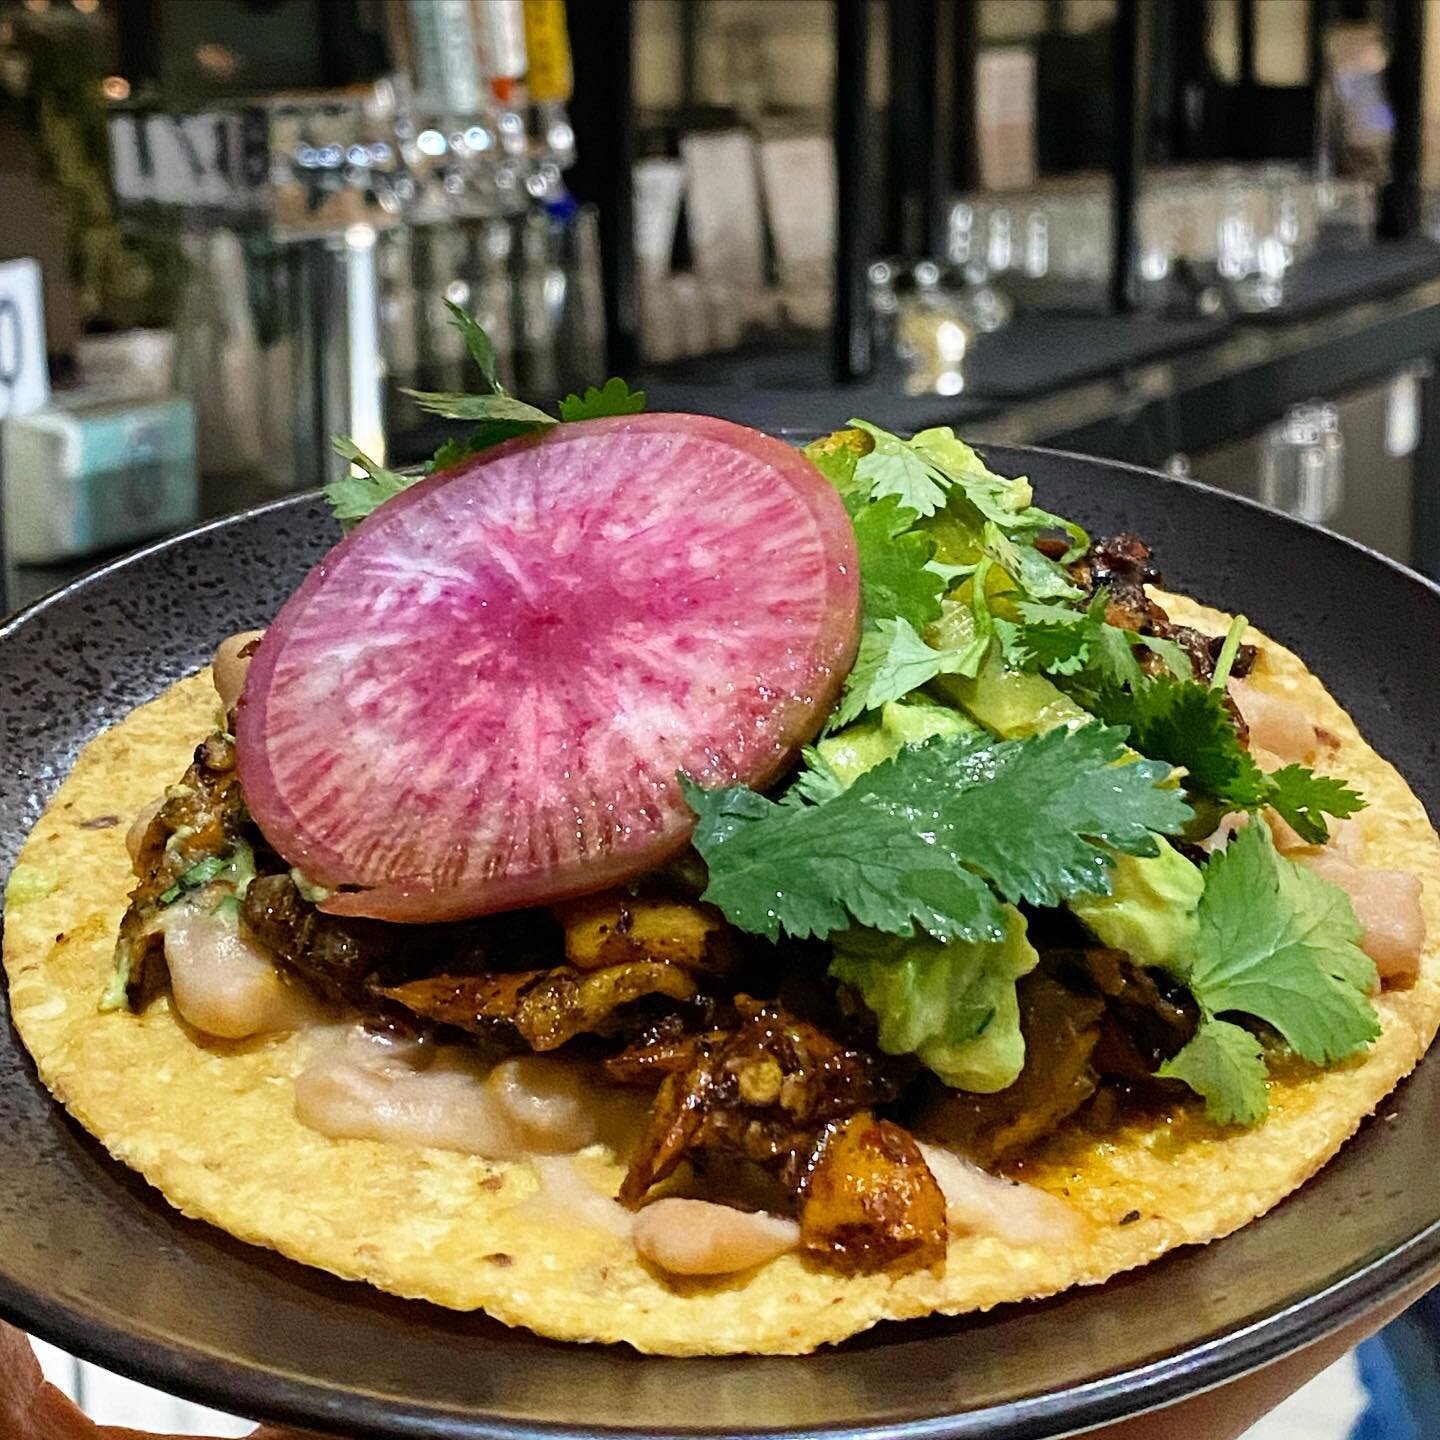 We&rsquo;ve got another brand new special🙌🏼 See you tomorrow for our mouth watering Black Pearl Mushroom Tostada! 

Includes:
Herbed Avocado Salsa
Lola&rsquo;s Beans
Fermented Cactus
Watermelon Radish
Picked Cilantro

#lola55 #lola55sandiego #miche